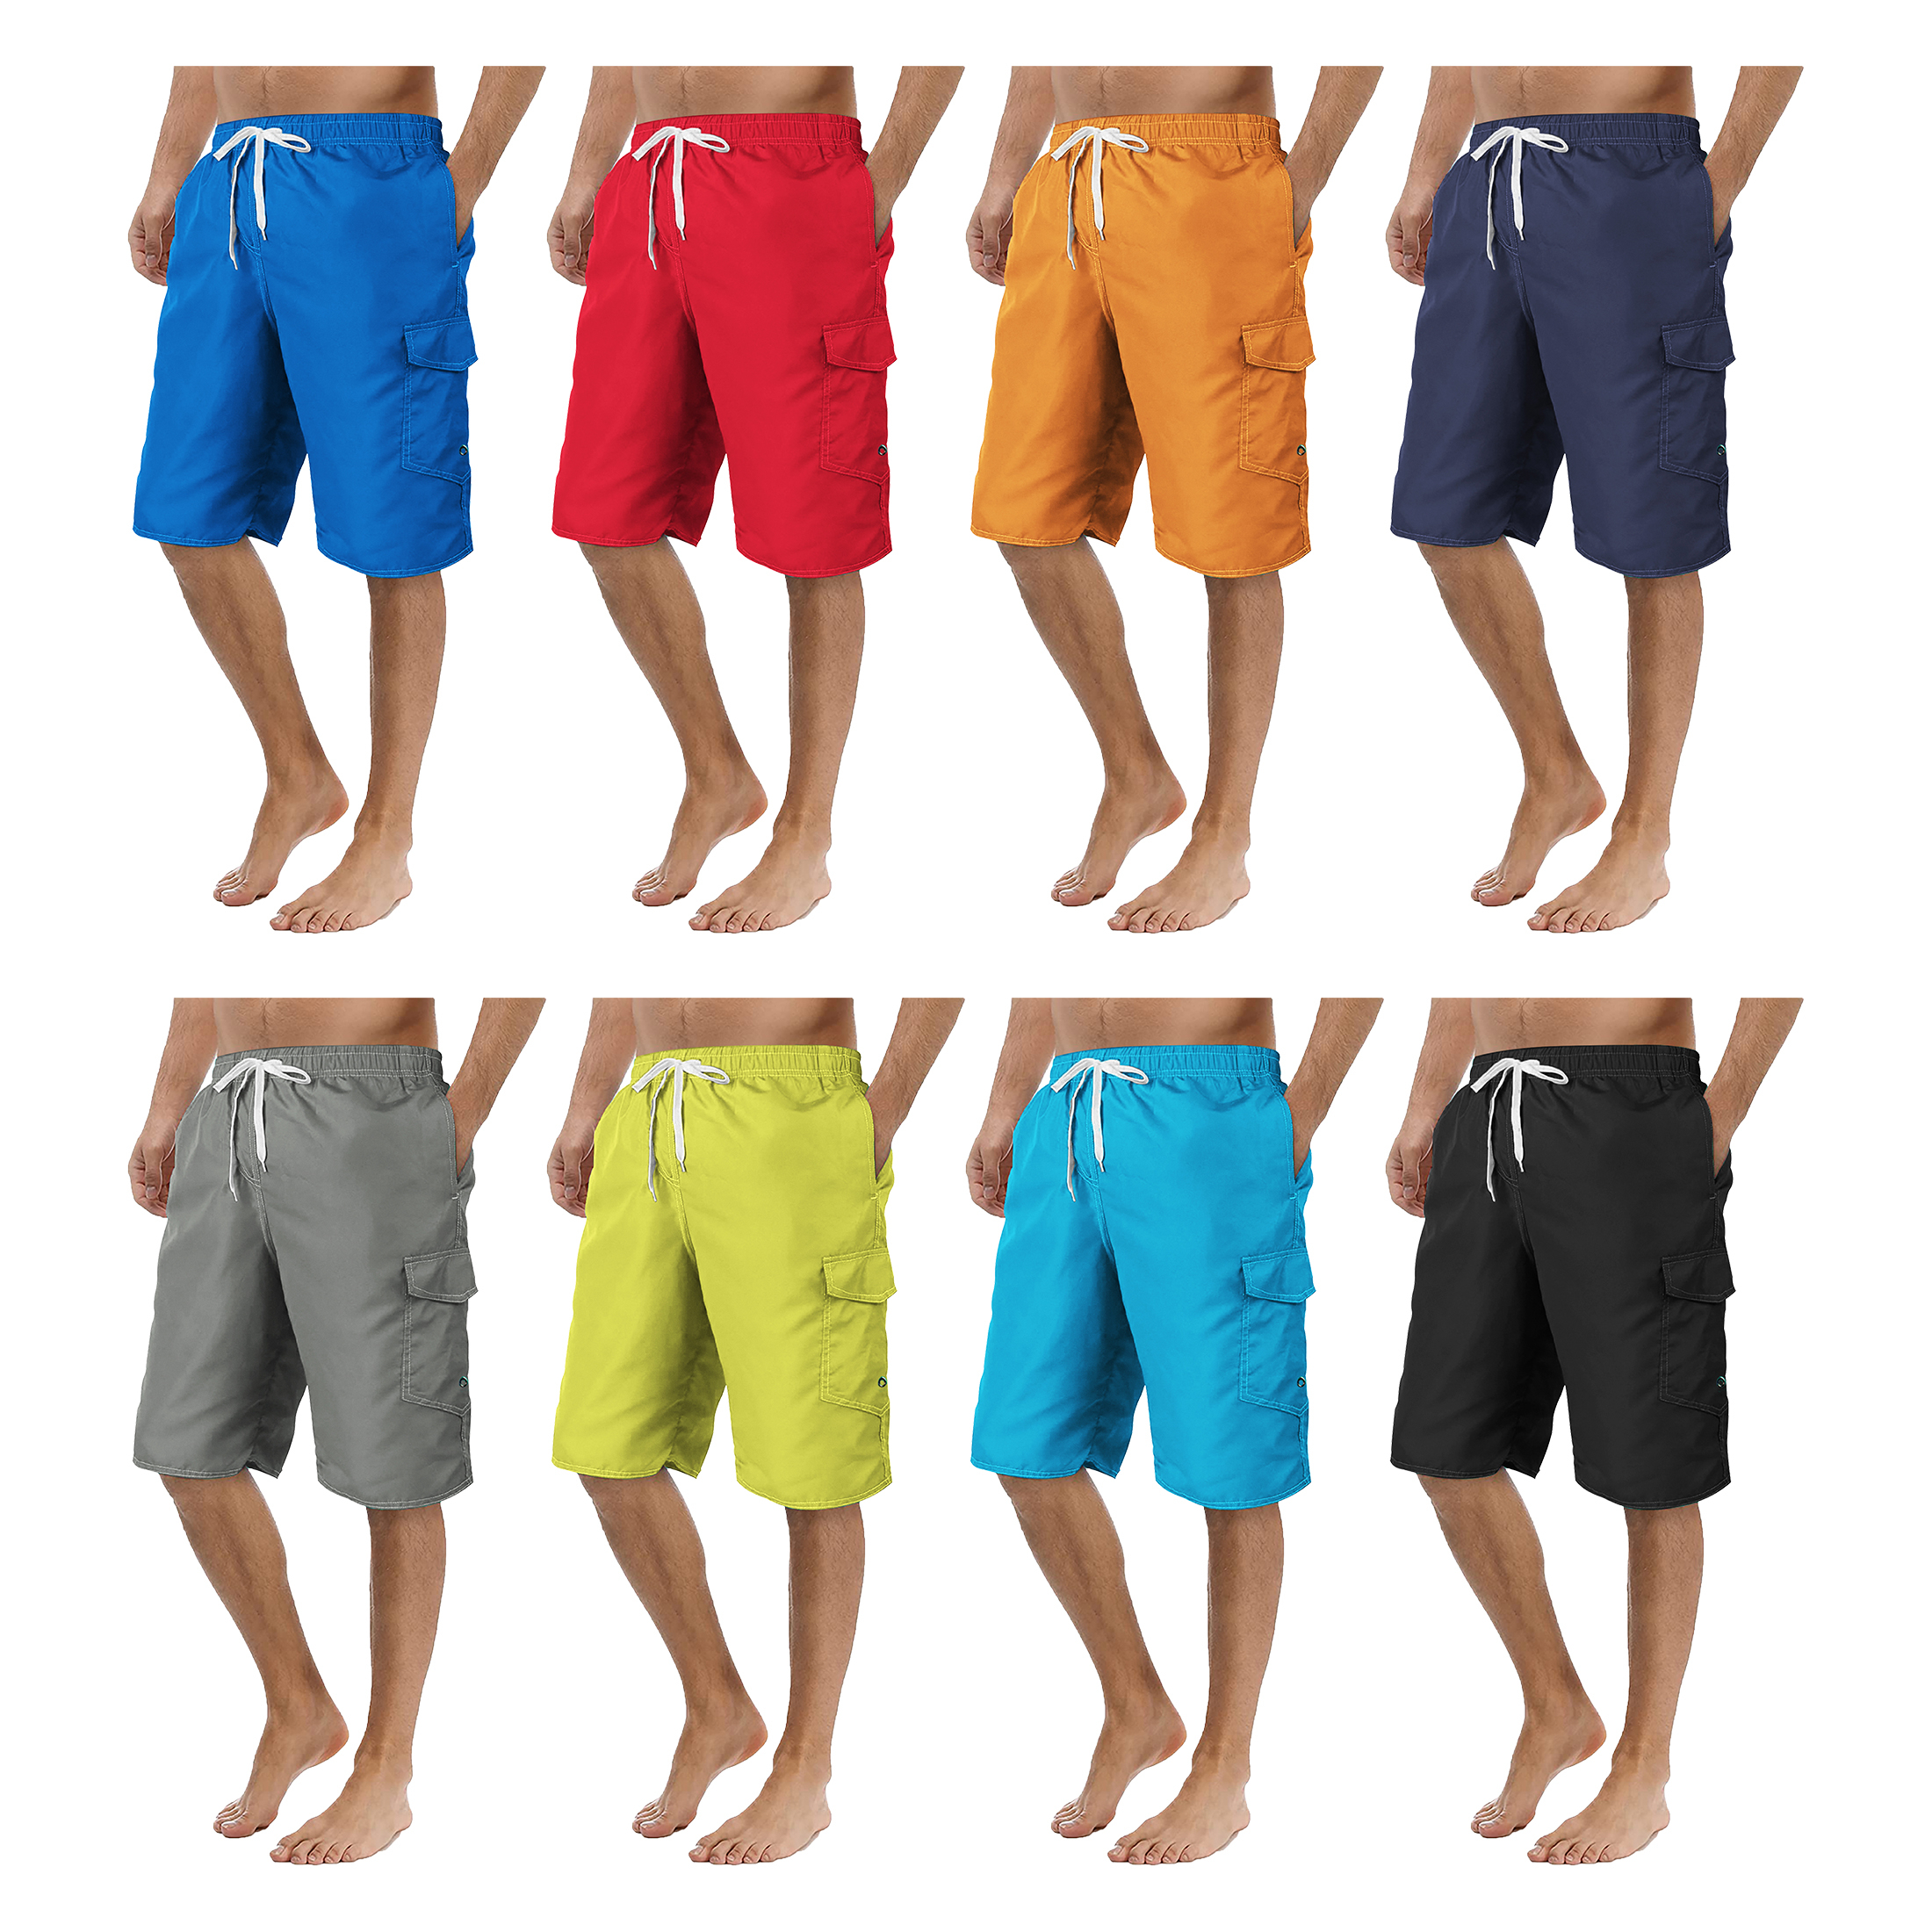 4-Pack Men's Quick Dry Cargo Swim Trunks Beachwear Bathing Suits With Pockets Solid Flex Board Shorts - XXL